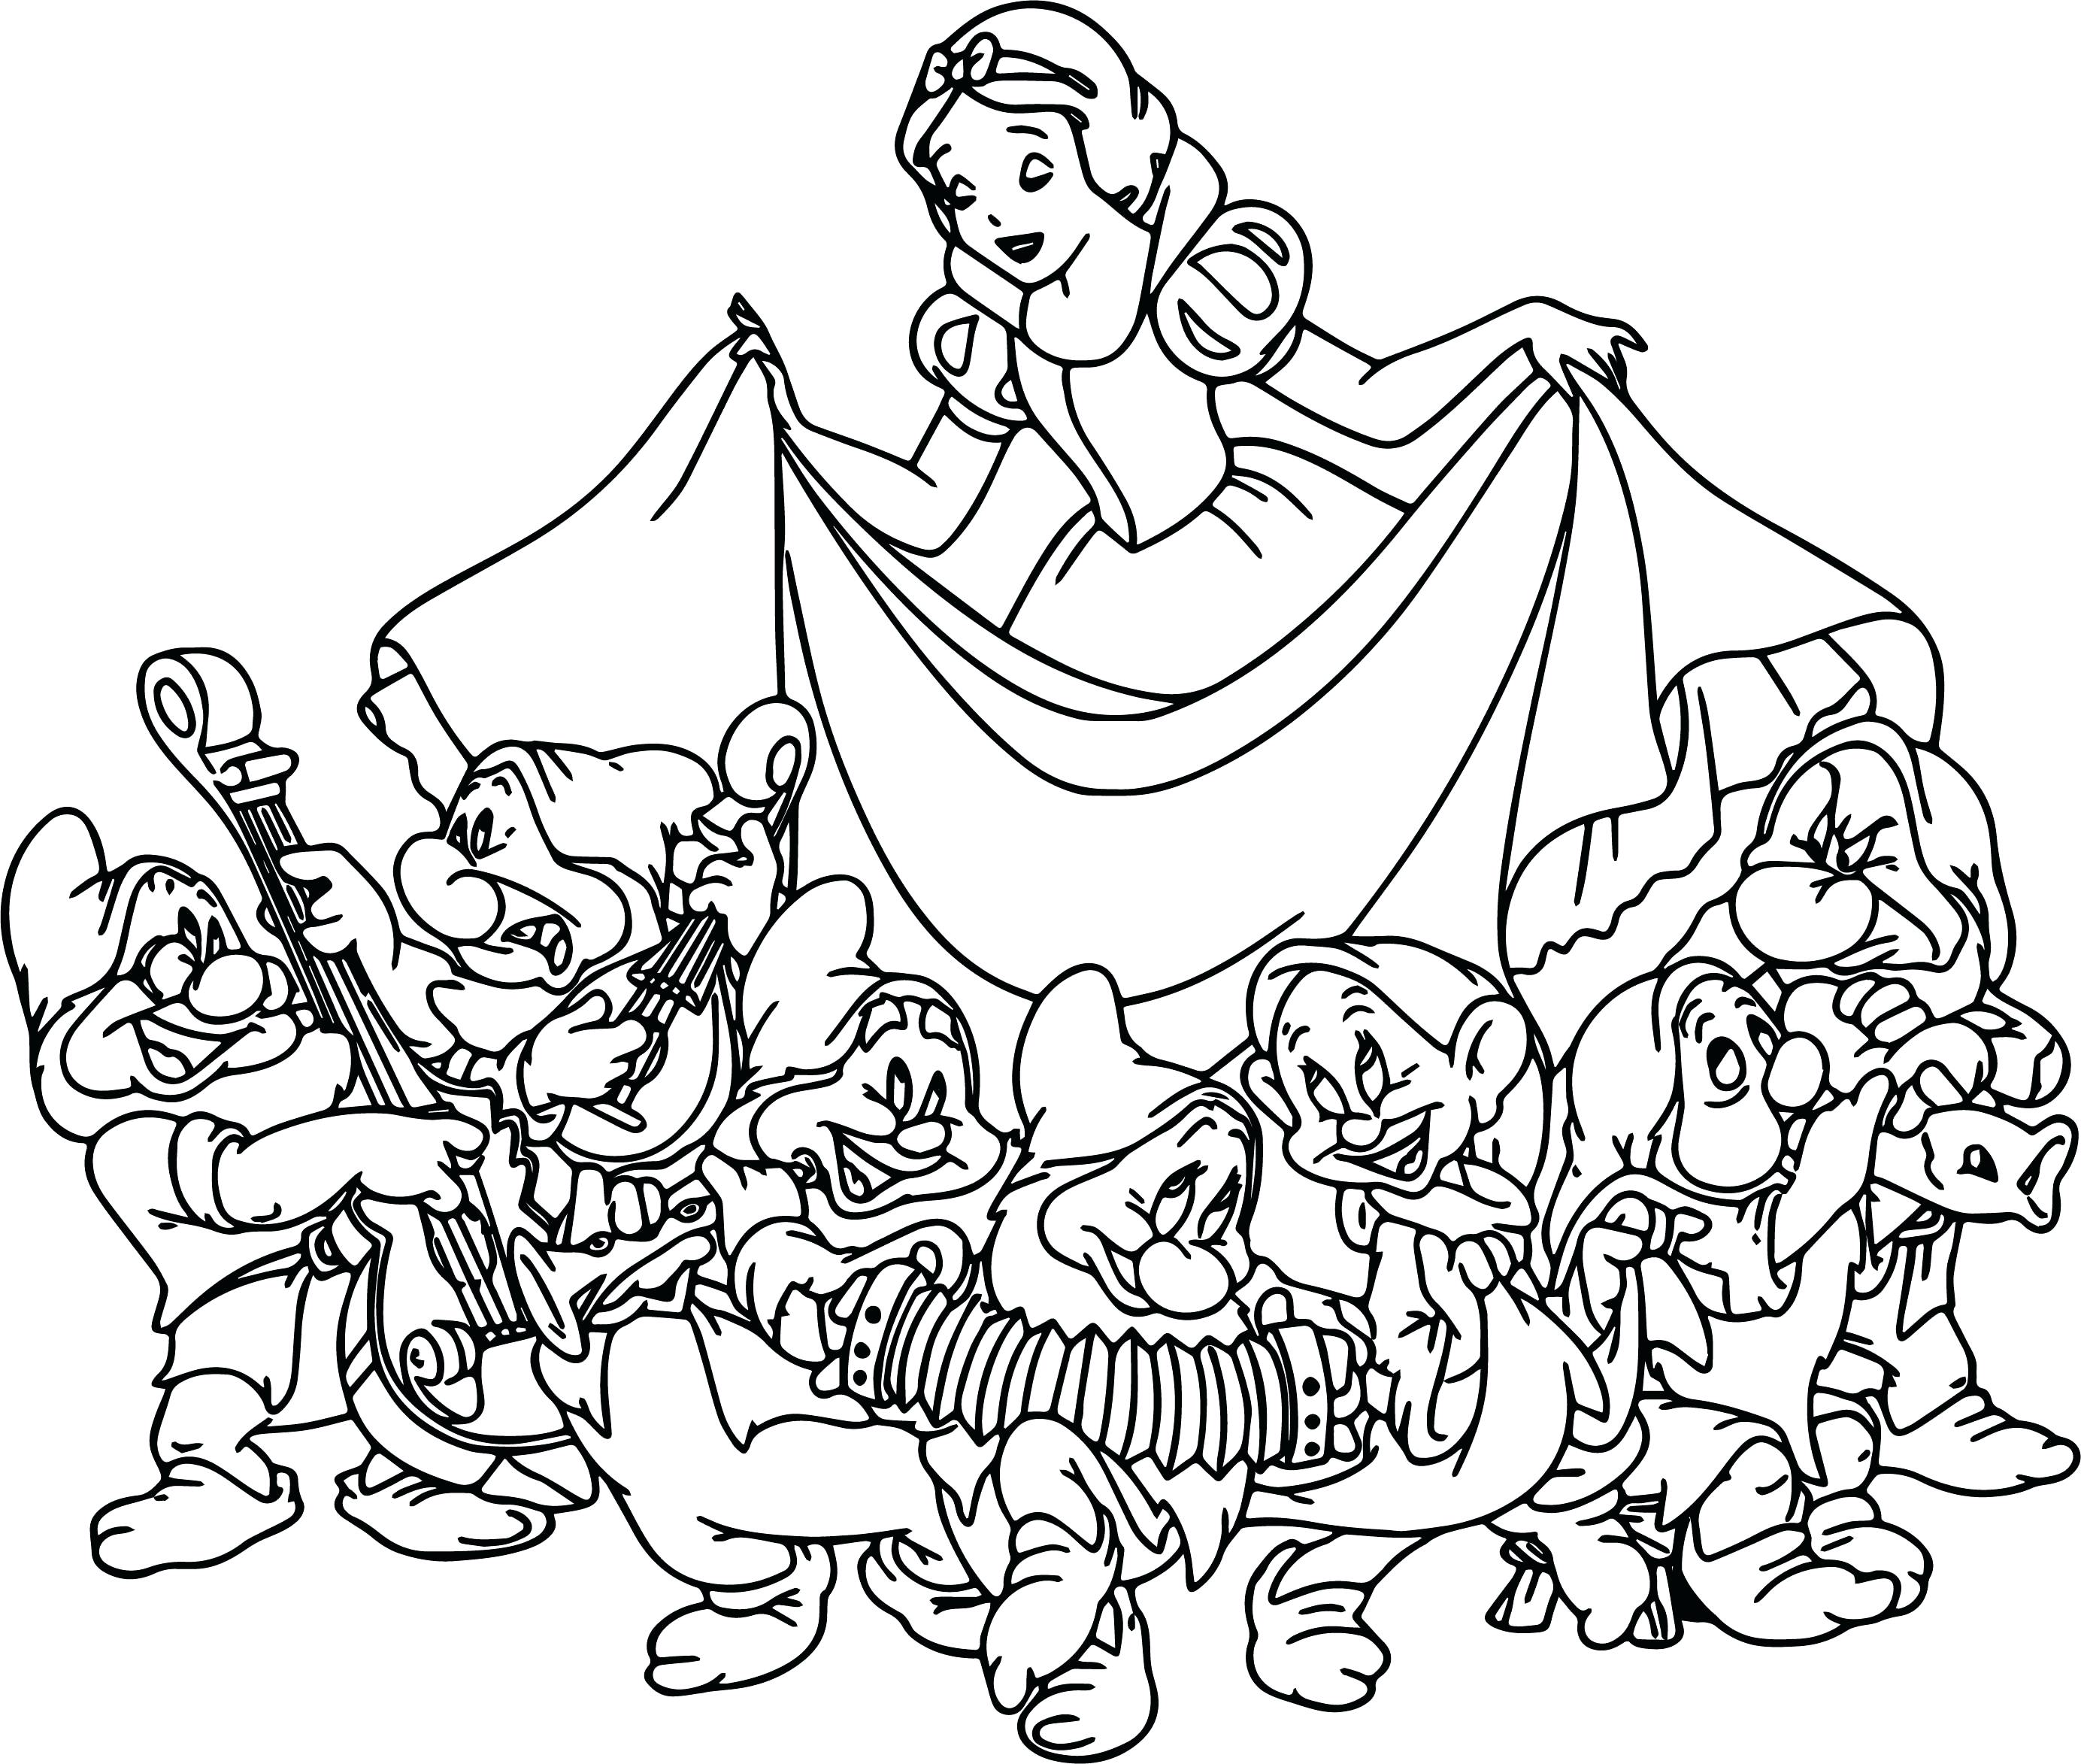 7 Dwarfs Coloring Pages Free download on ClipArtMag